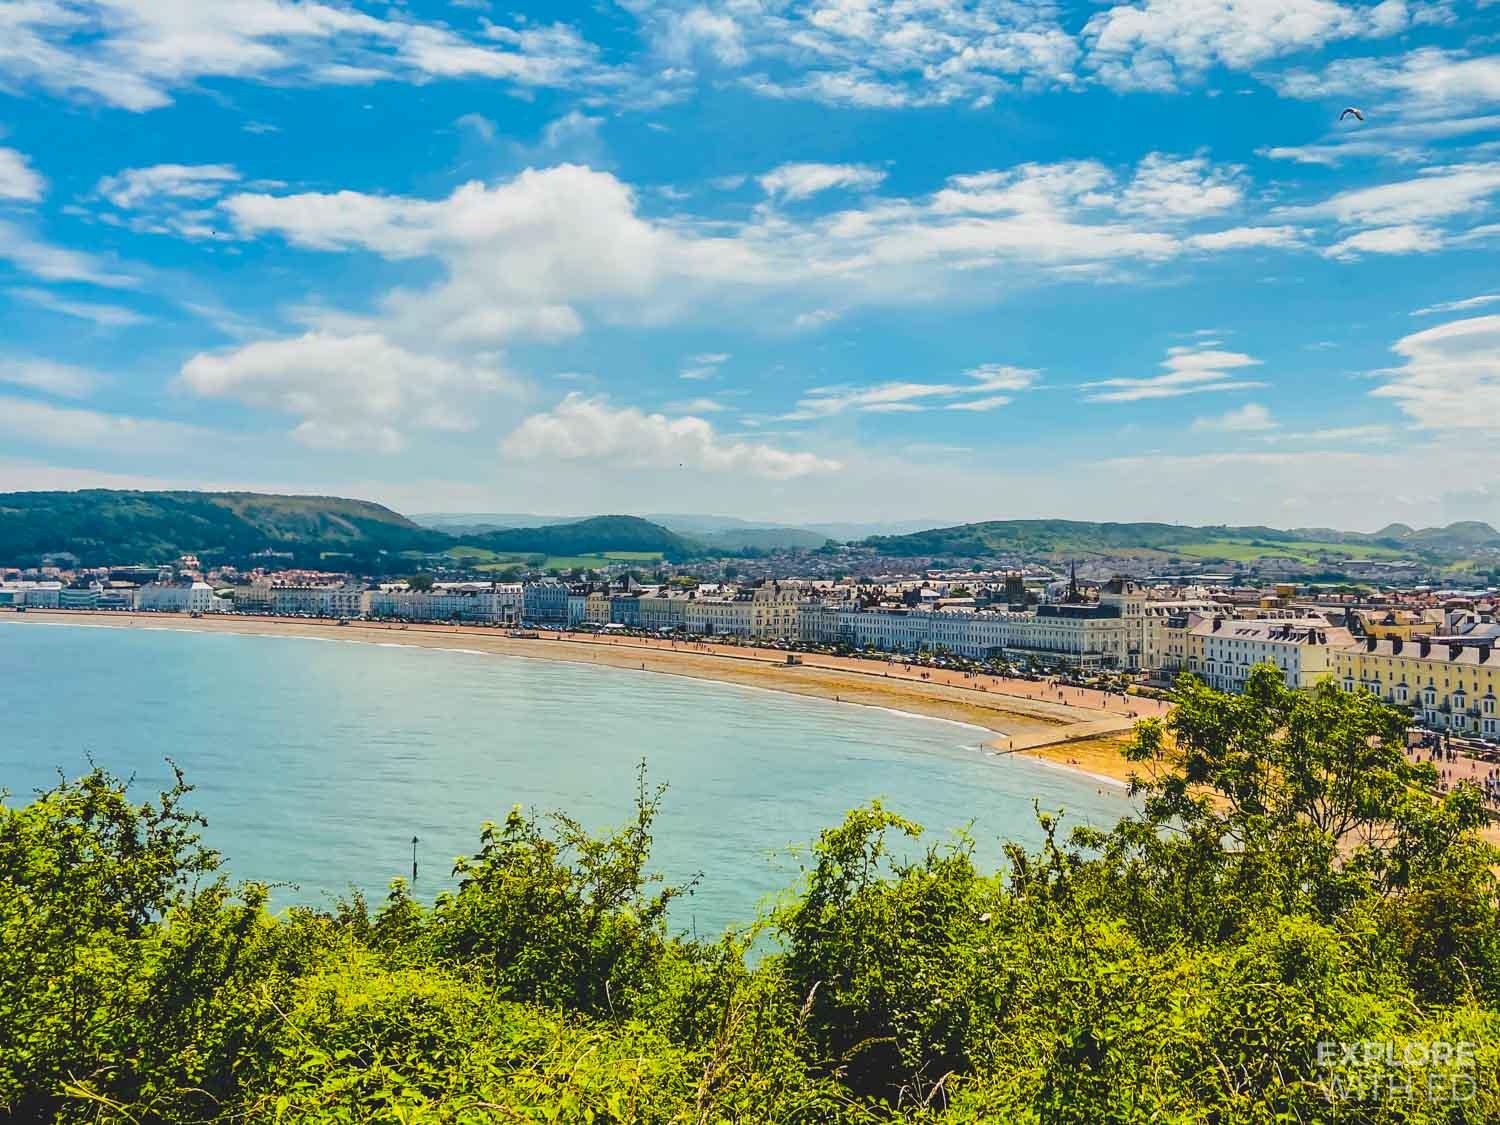 Where to stay in Llandudno, Wales